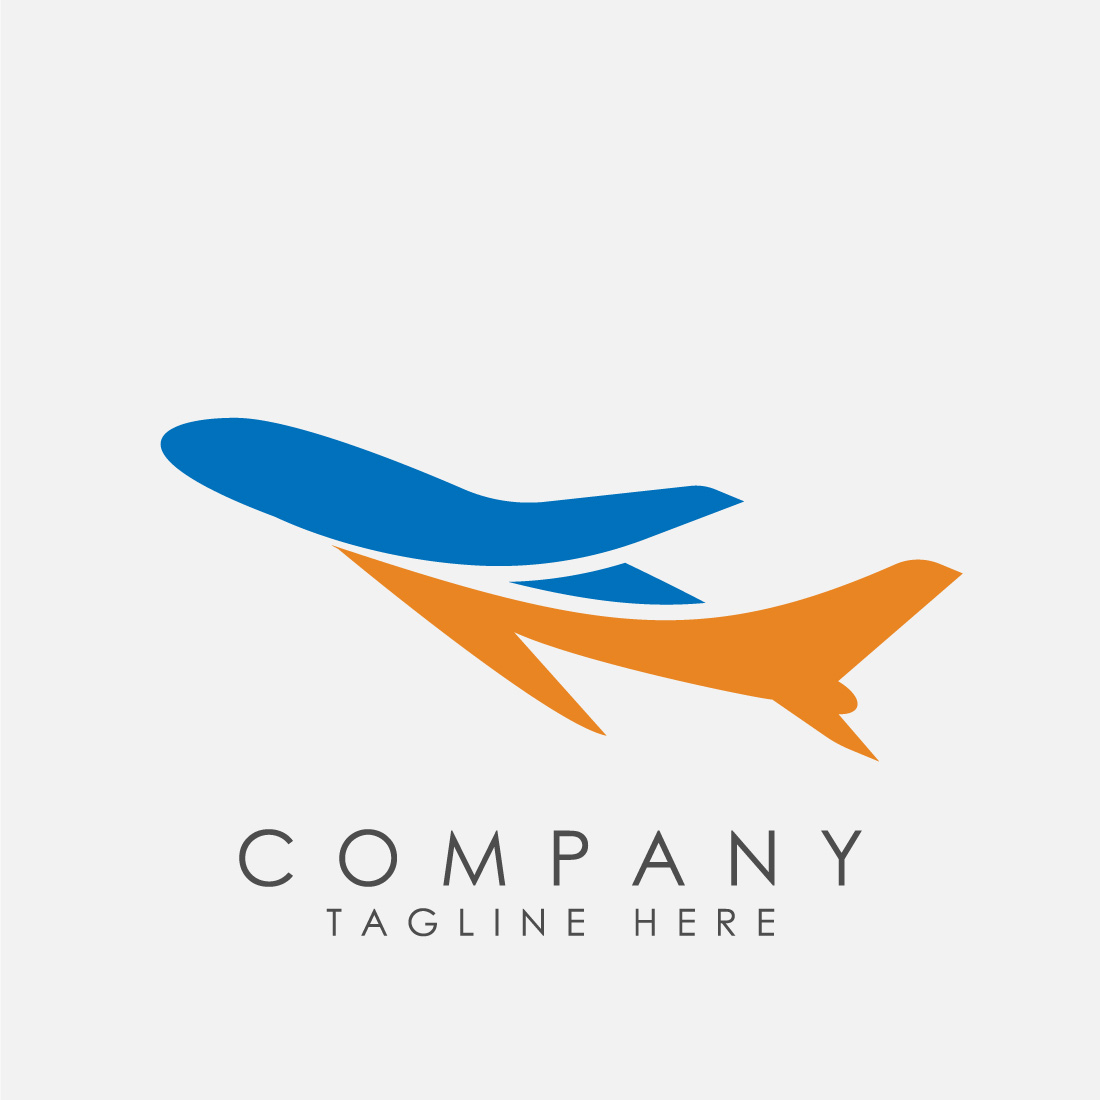 Airplane aviation vector logo design concept Airline logo plane travel icon Airport flight world aviation preview image.